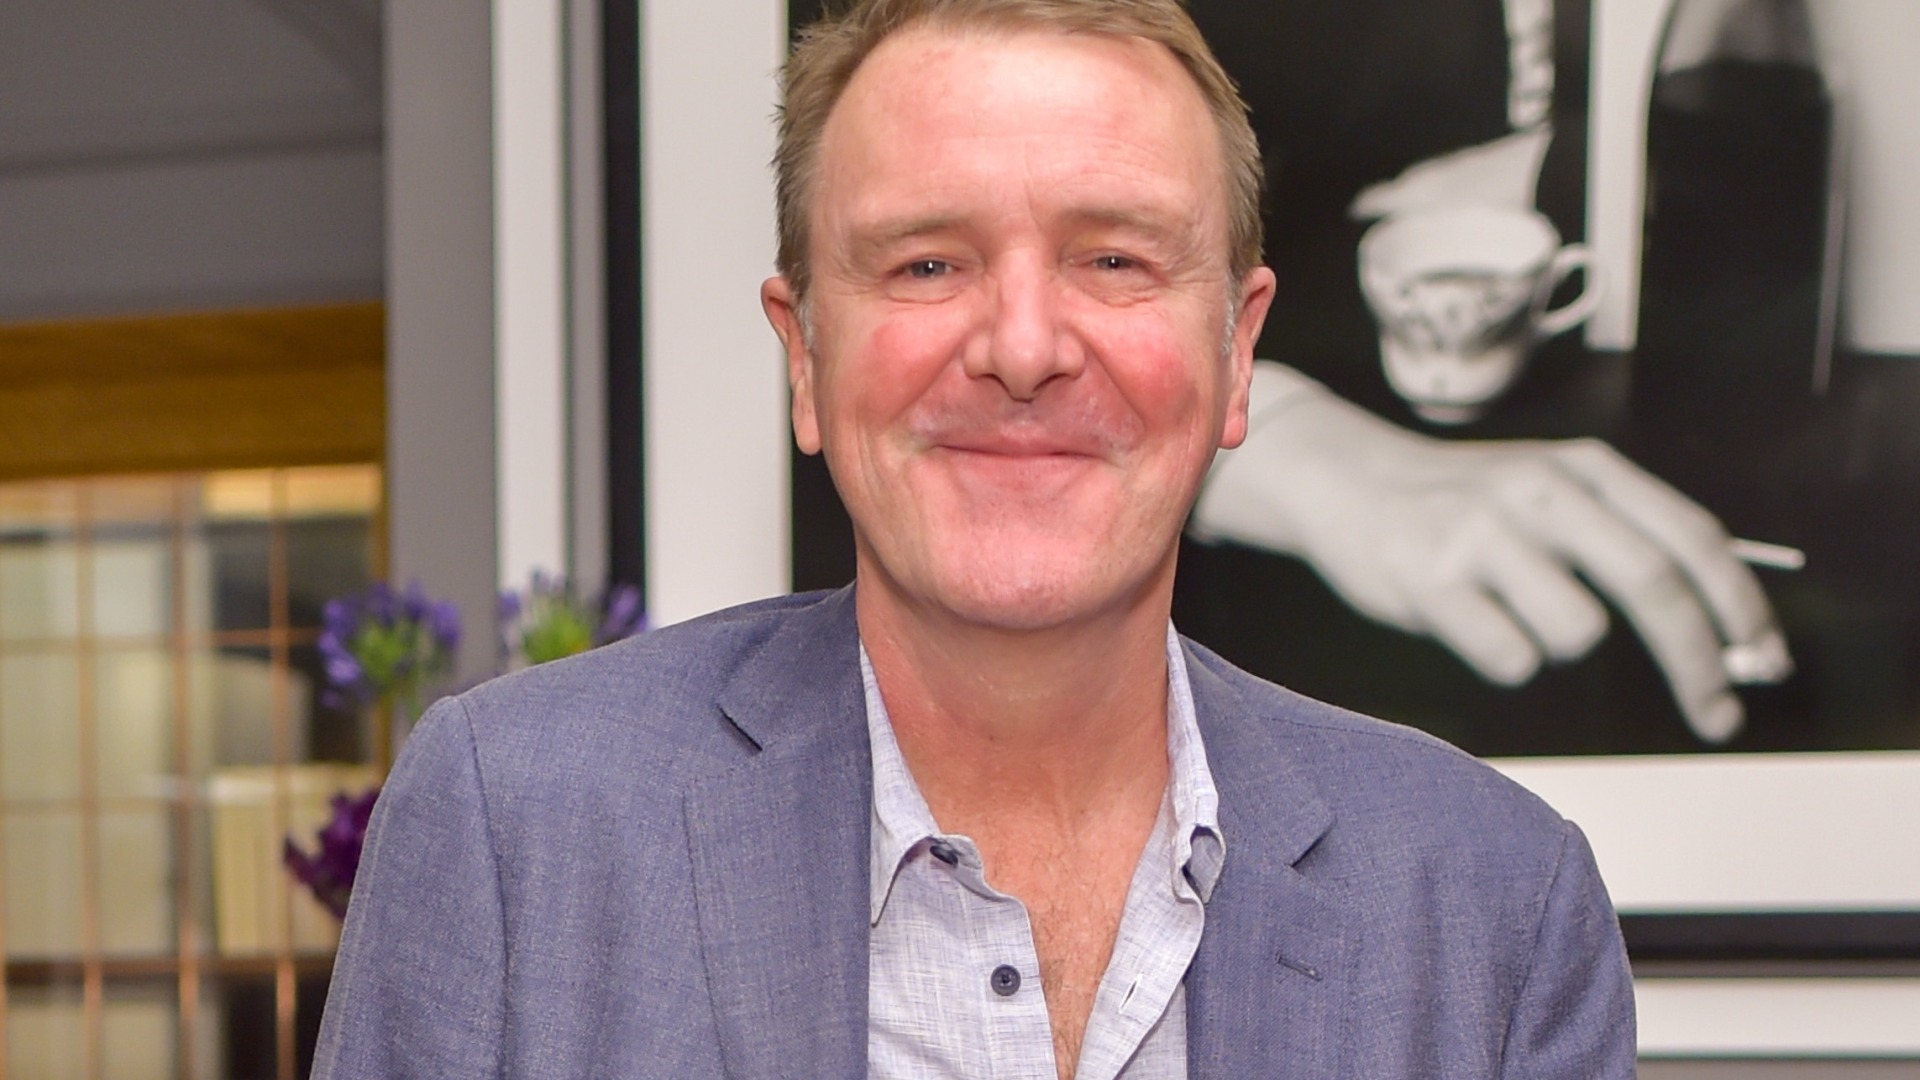 How rich is Phil Tufnell, and who is he?